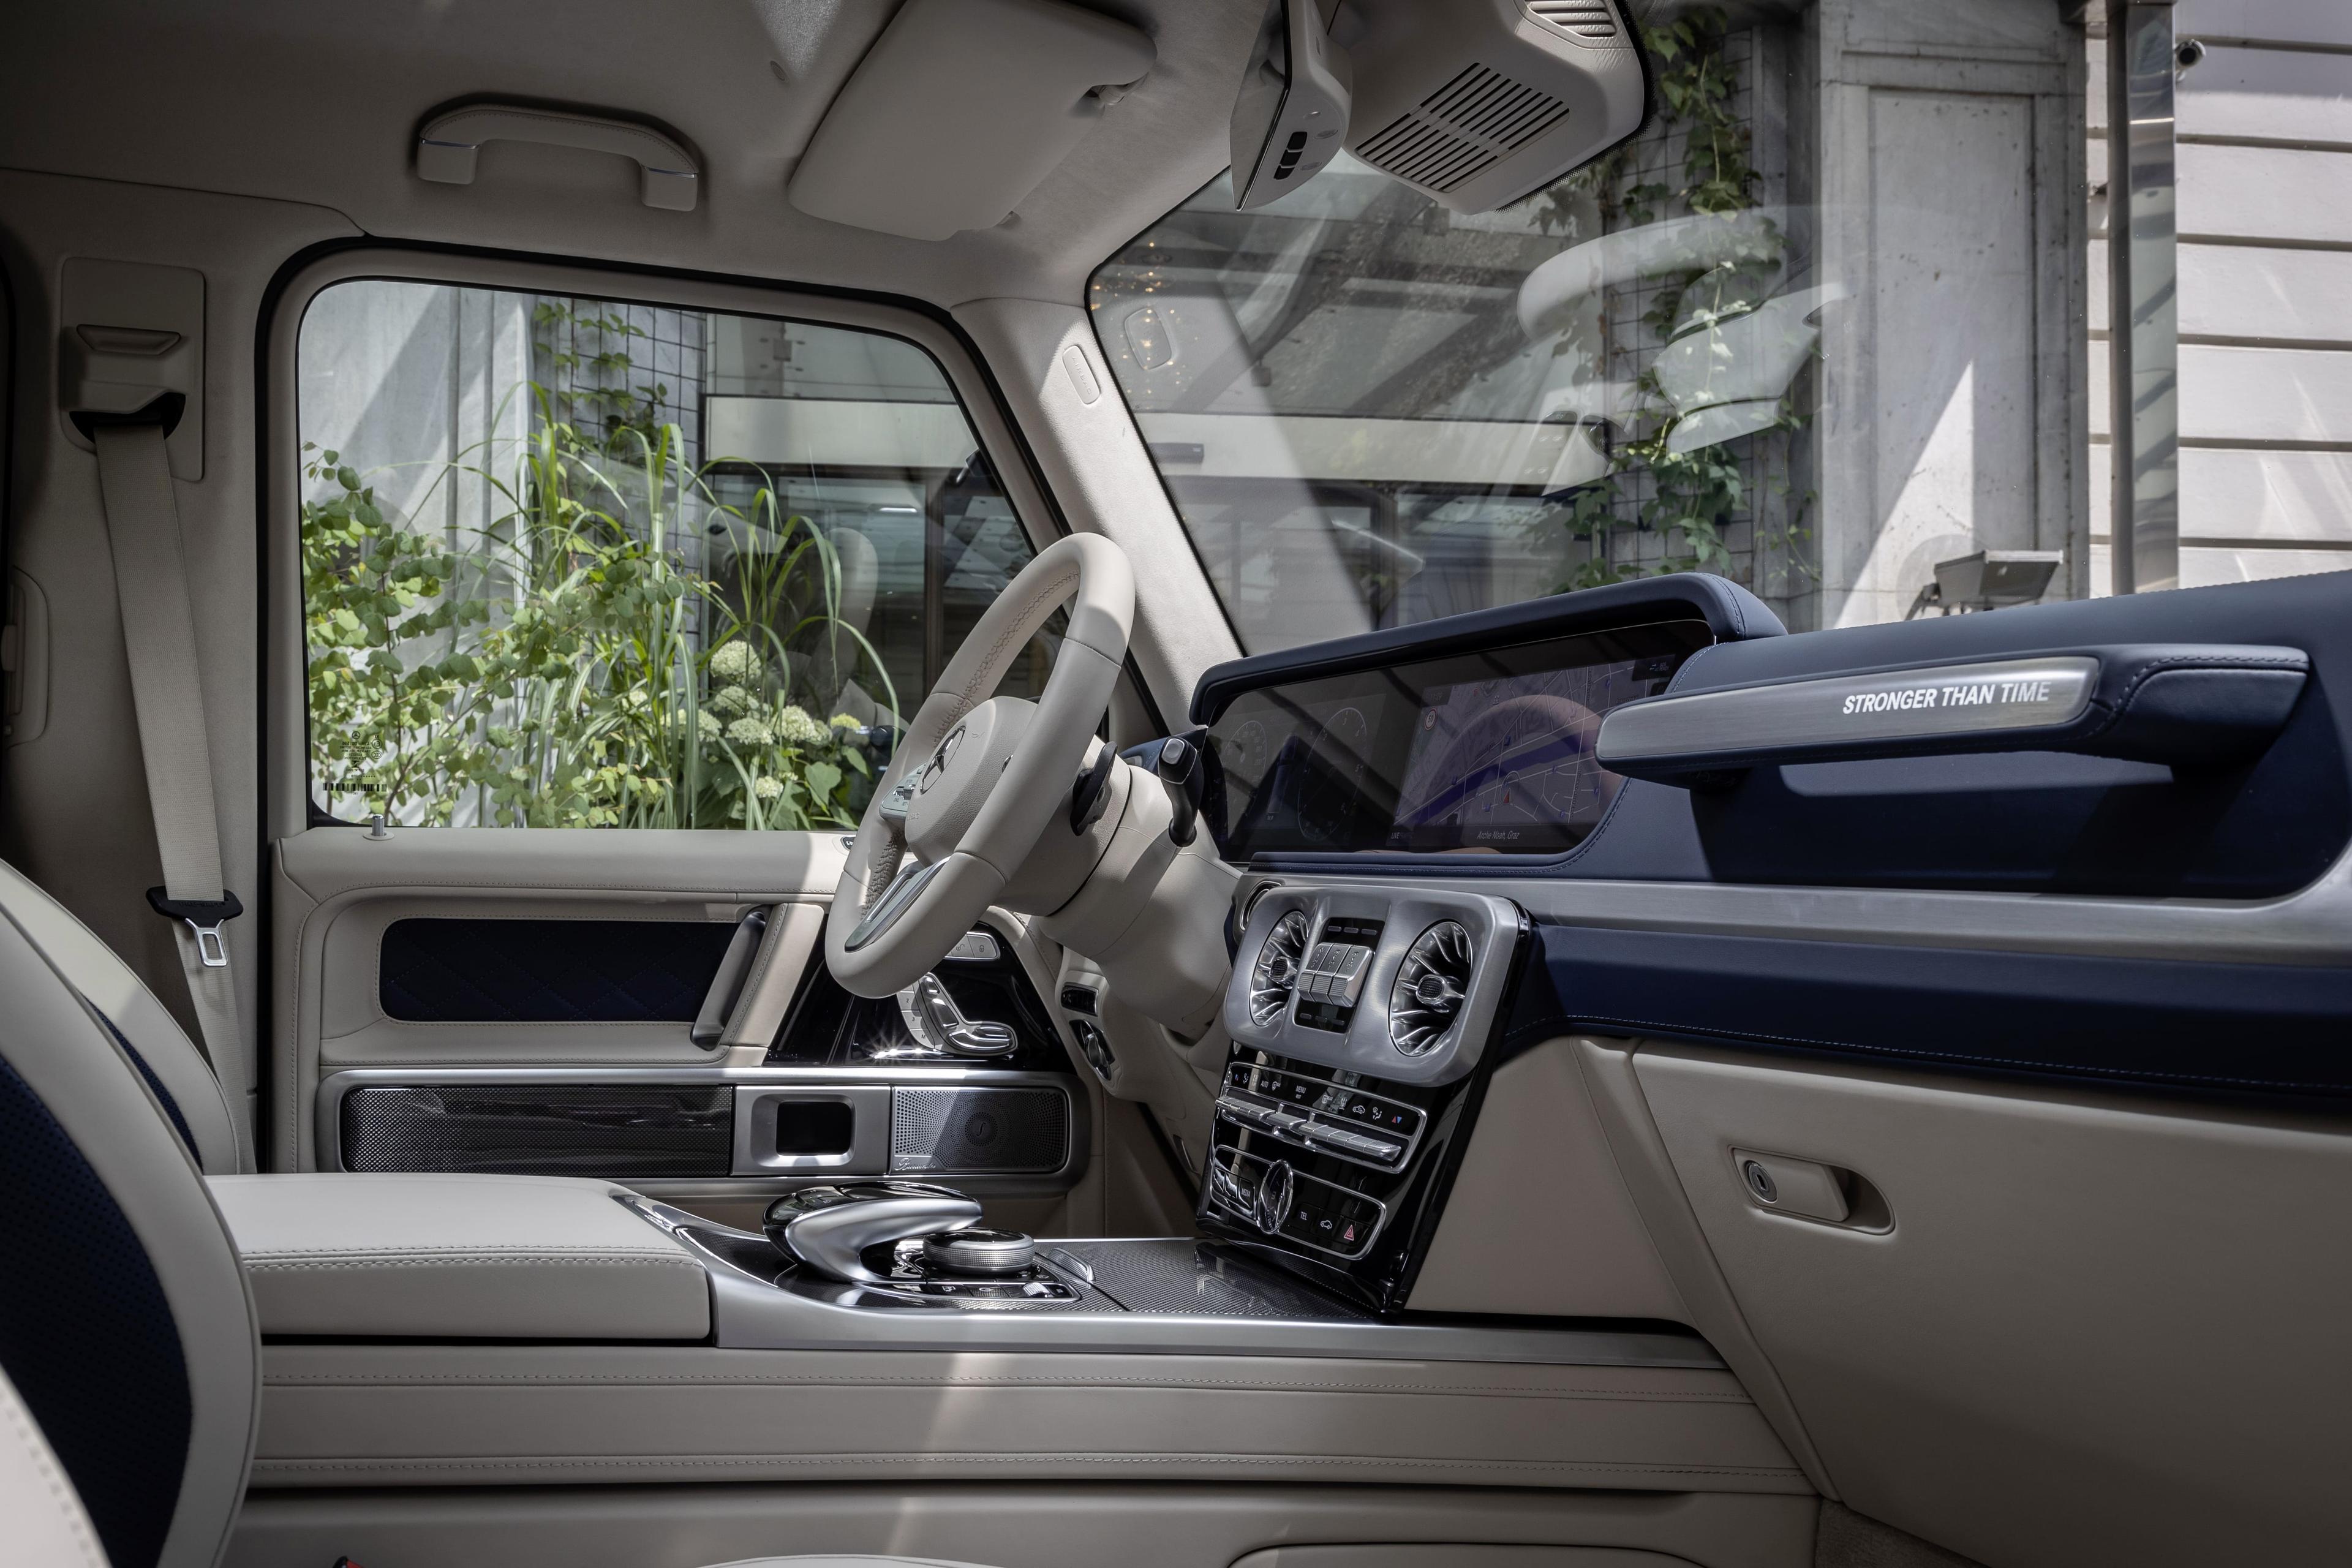 The 2021 Mercedes-Benz G-Class has a luxurious interior and practical features.